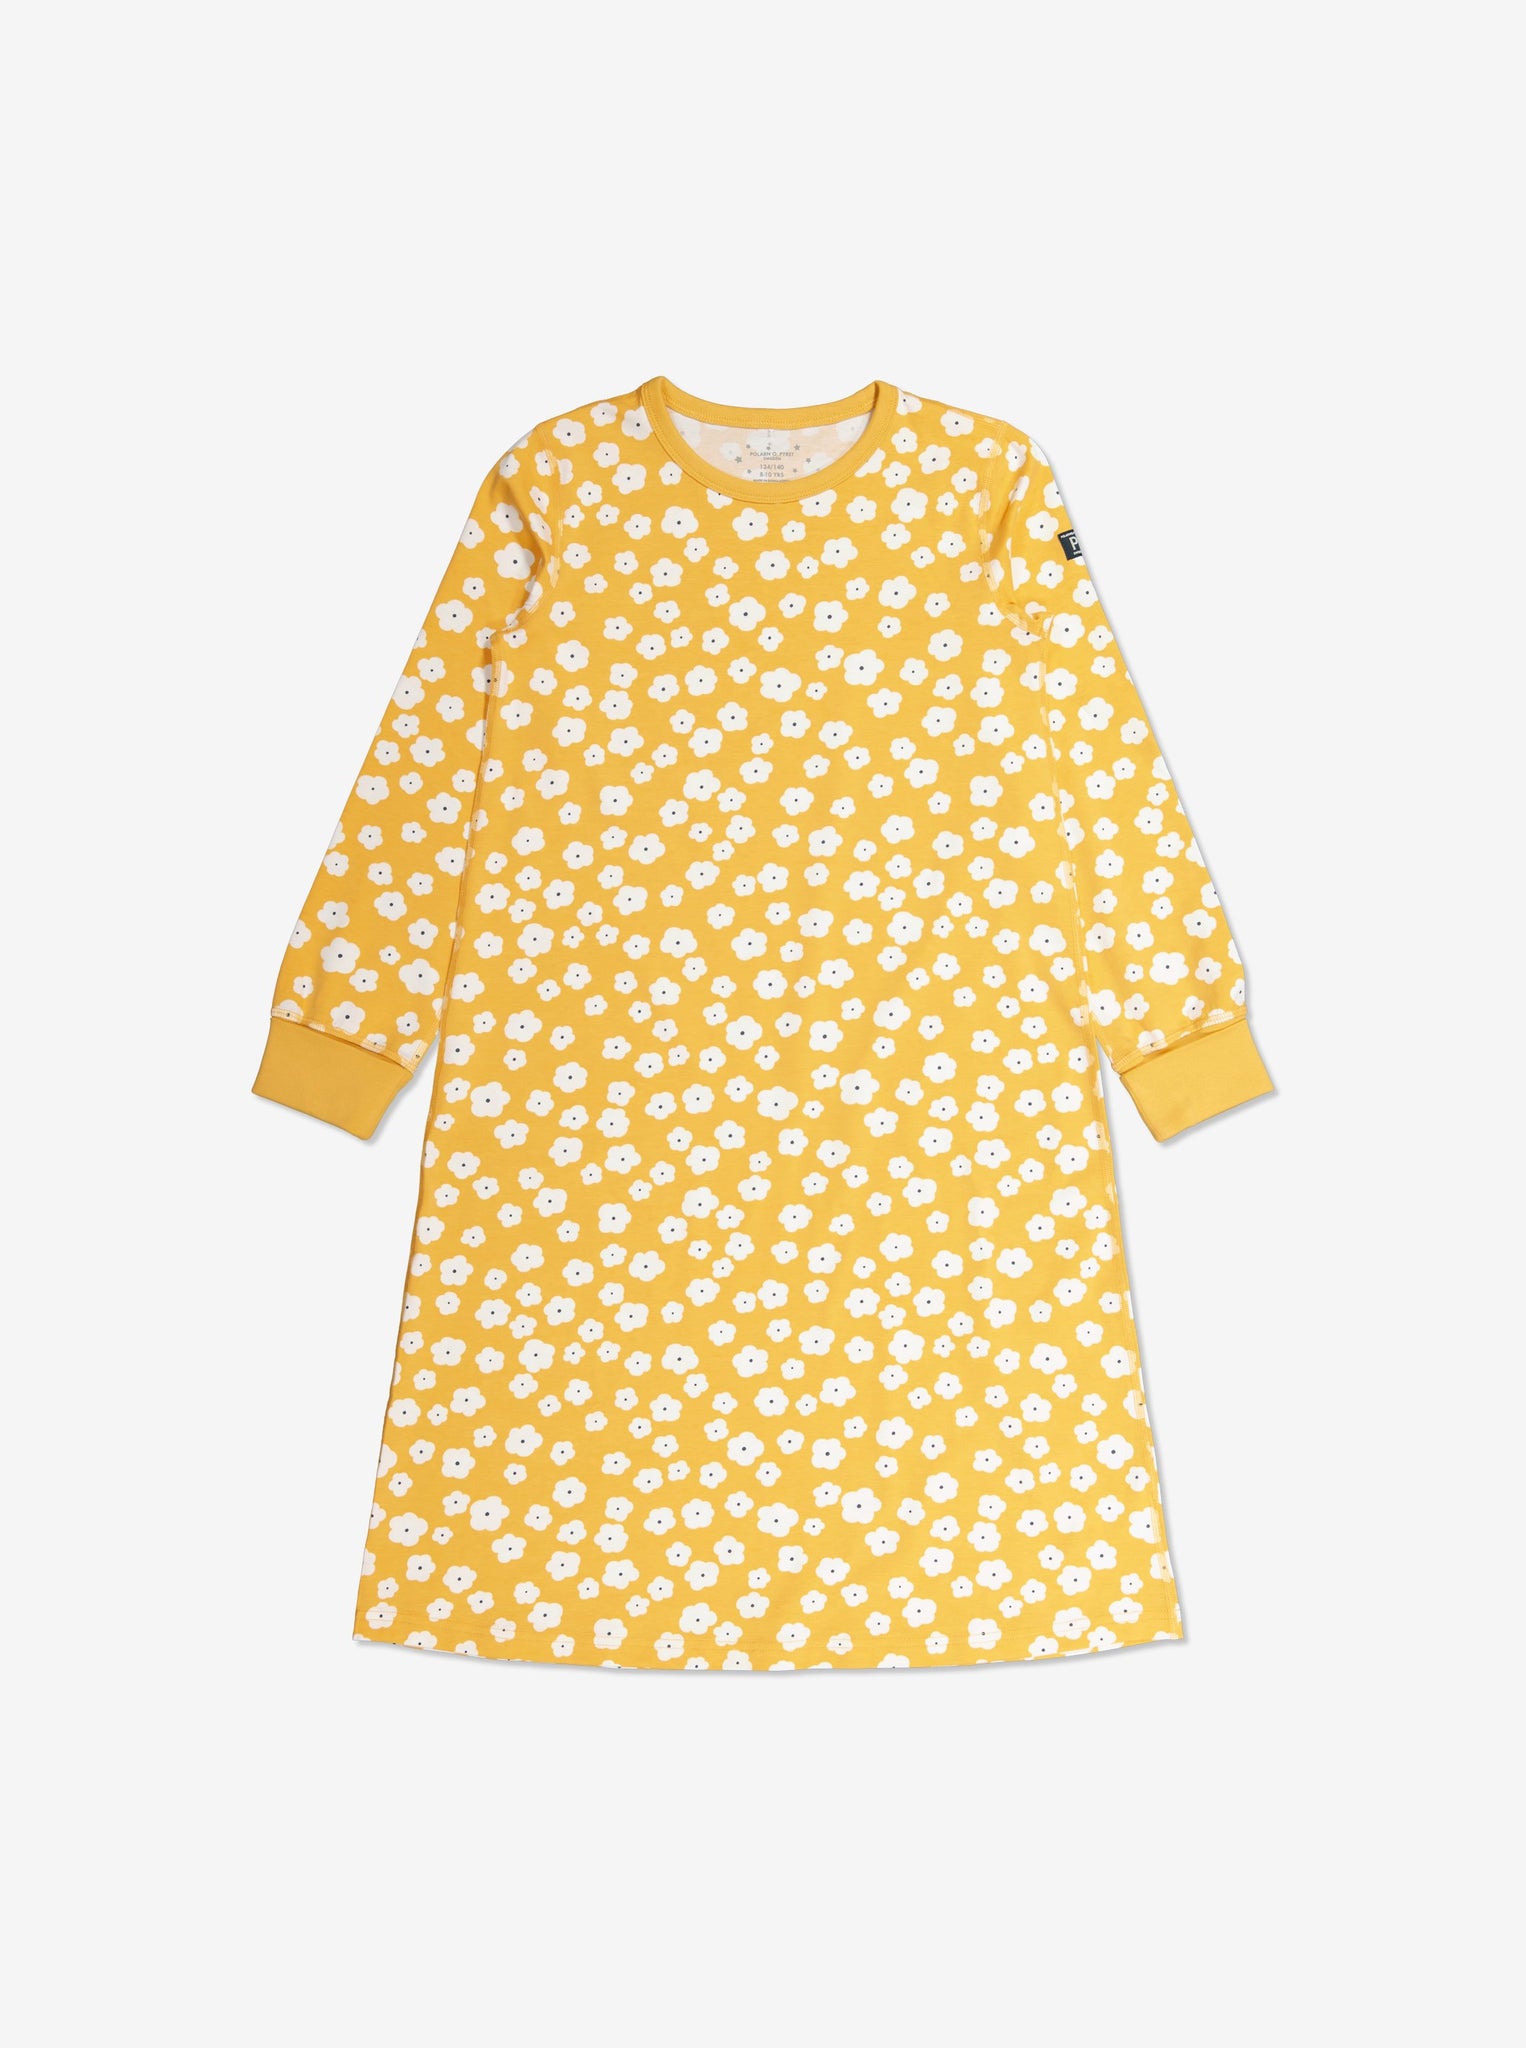  Organic Yellow Floral Kids Nightdress from Polarn O. Pyret Kidswear. Made from eco-friendly materials.